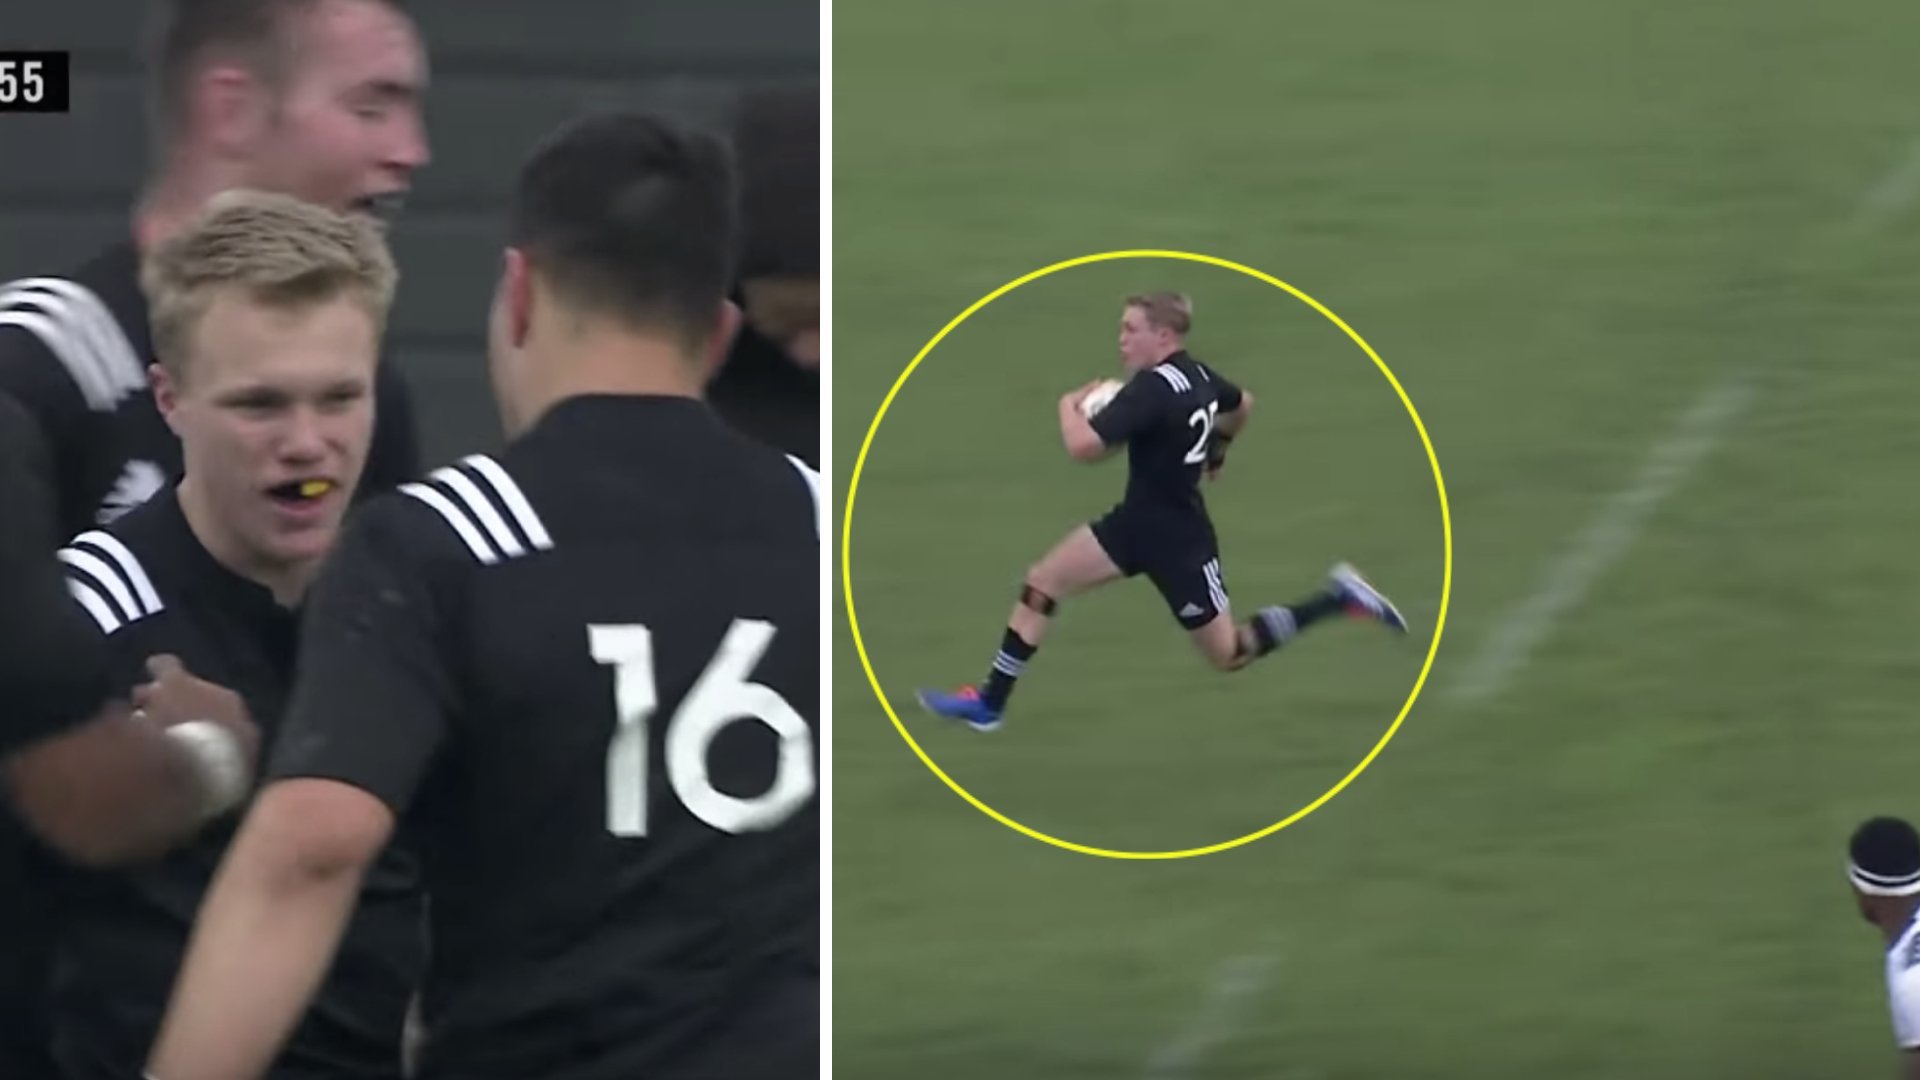 Youngster in New Zealand labelled the next Christian Cullen after this ridiculous solo run